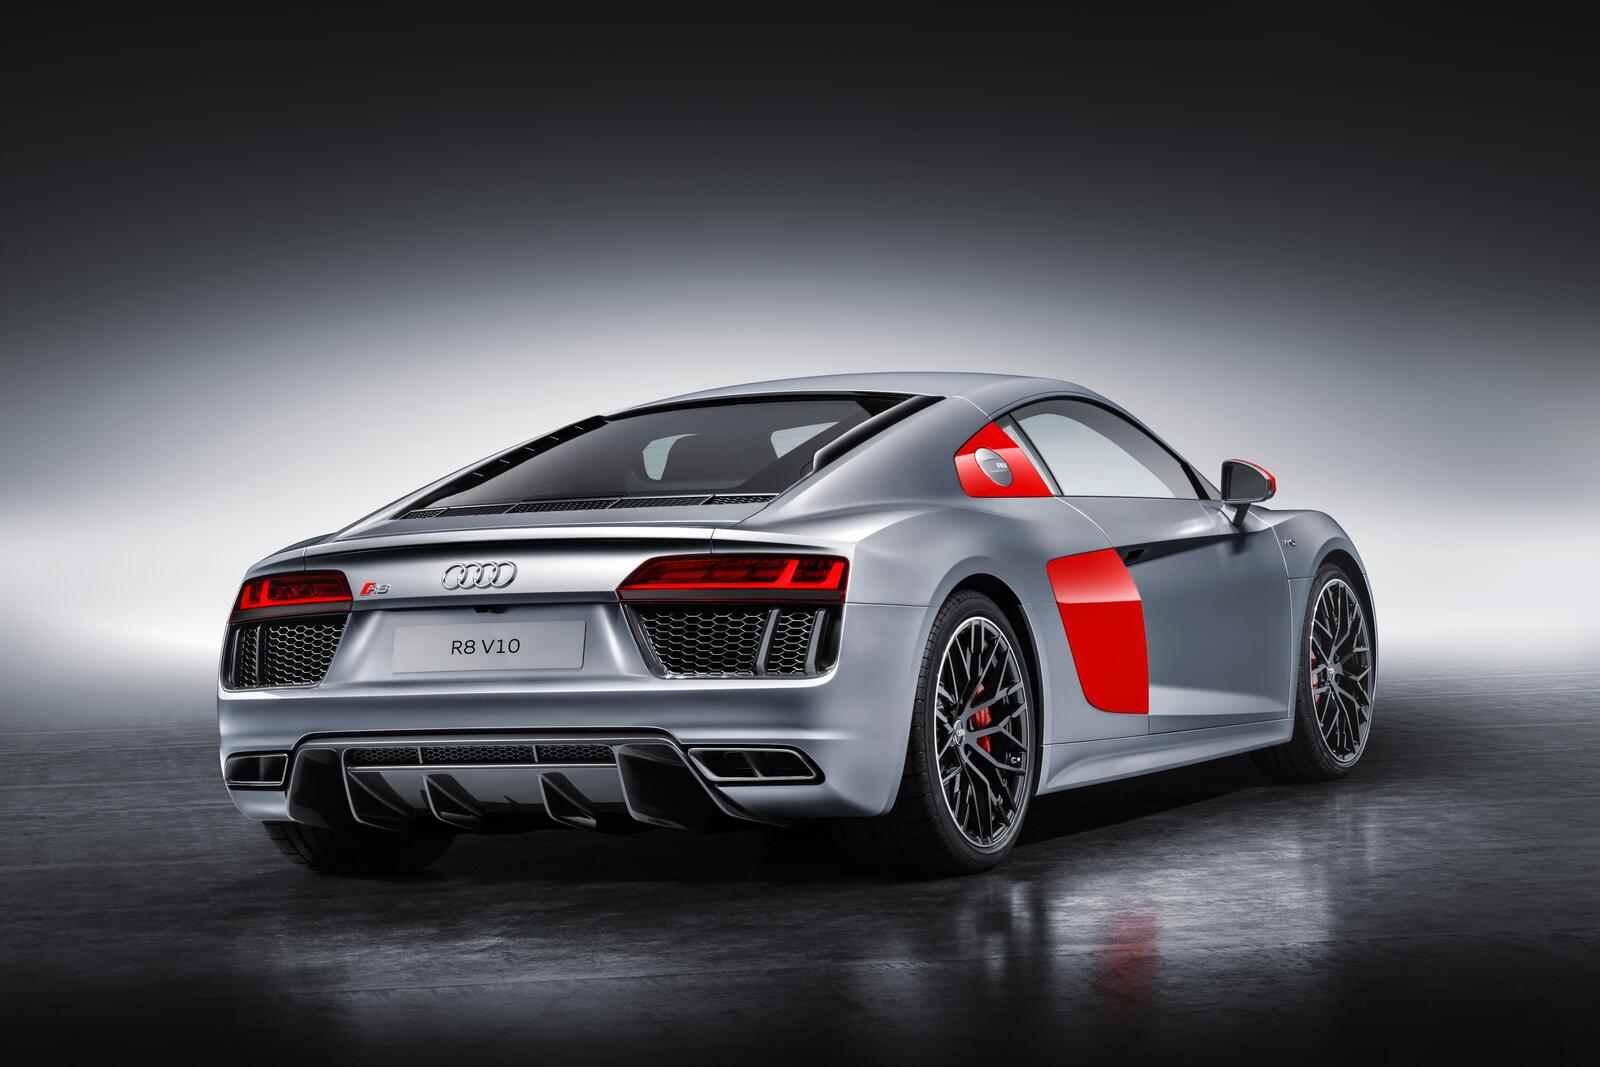 Wallpapers Audi R8 V10 Coupe Edition Audi Sport machine view from behind on the desktop